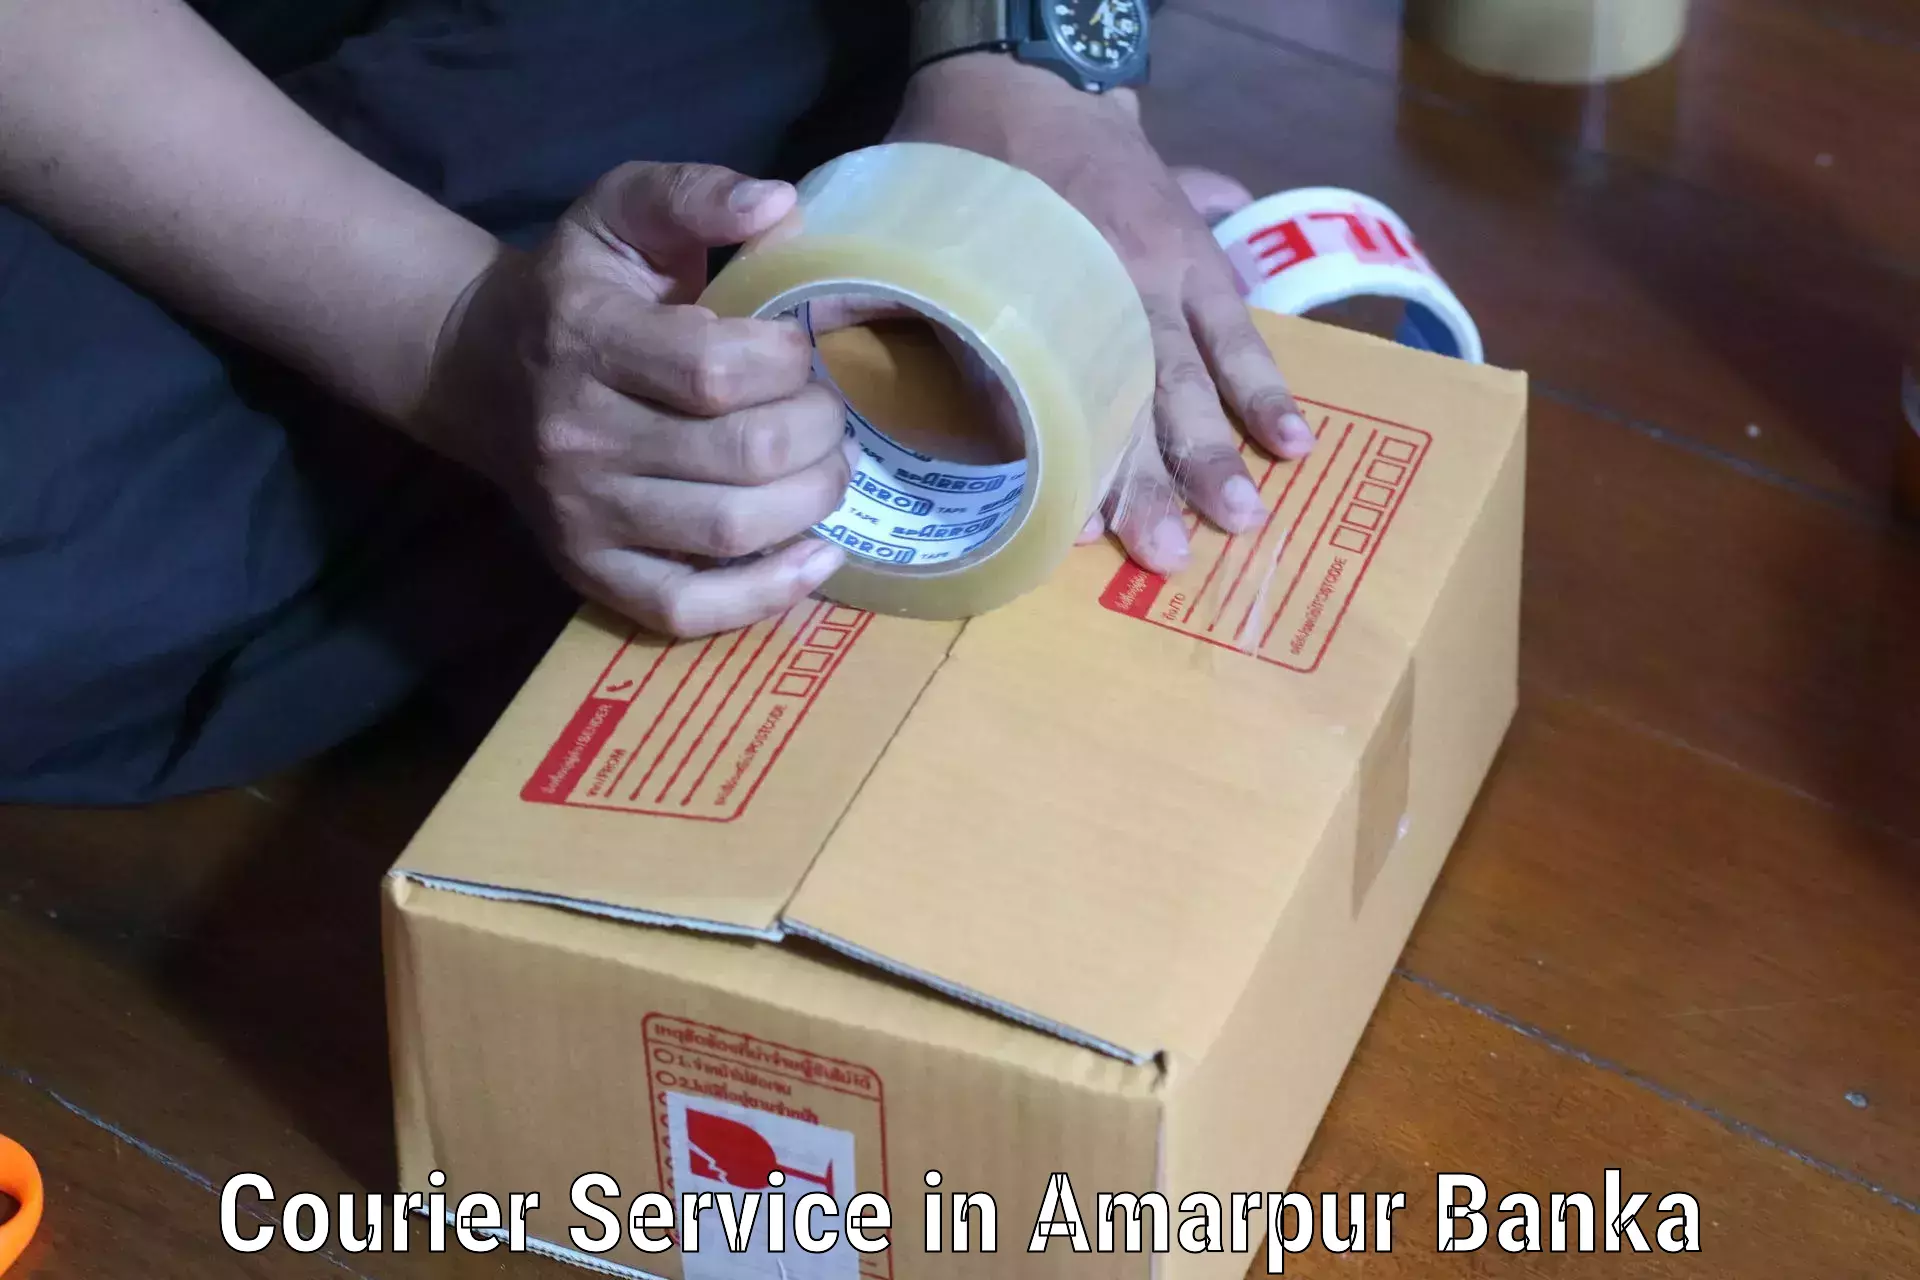 End-to-end delivery in Amarpur Banka